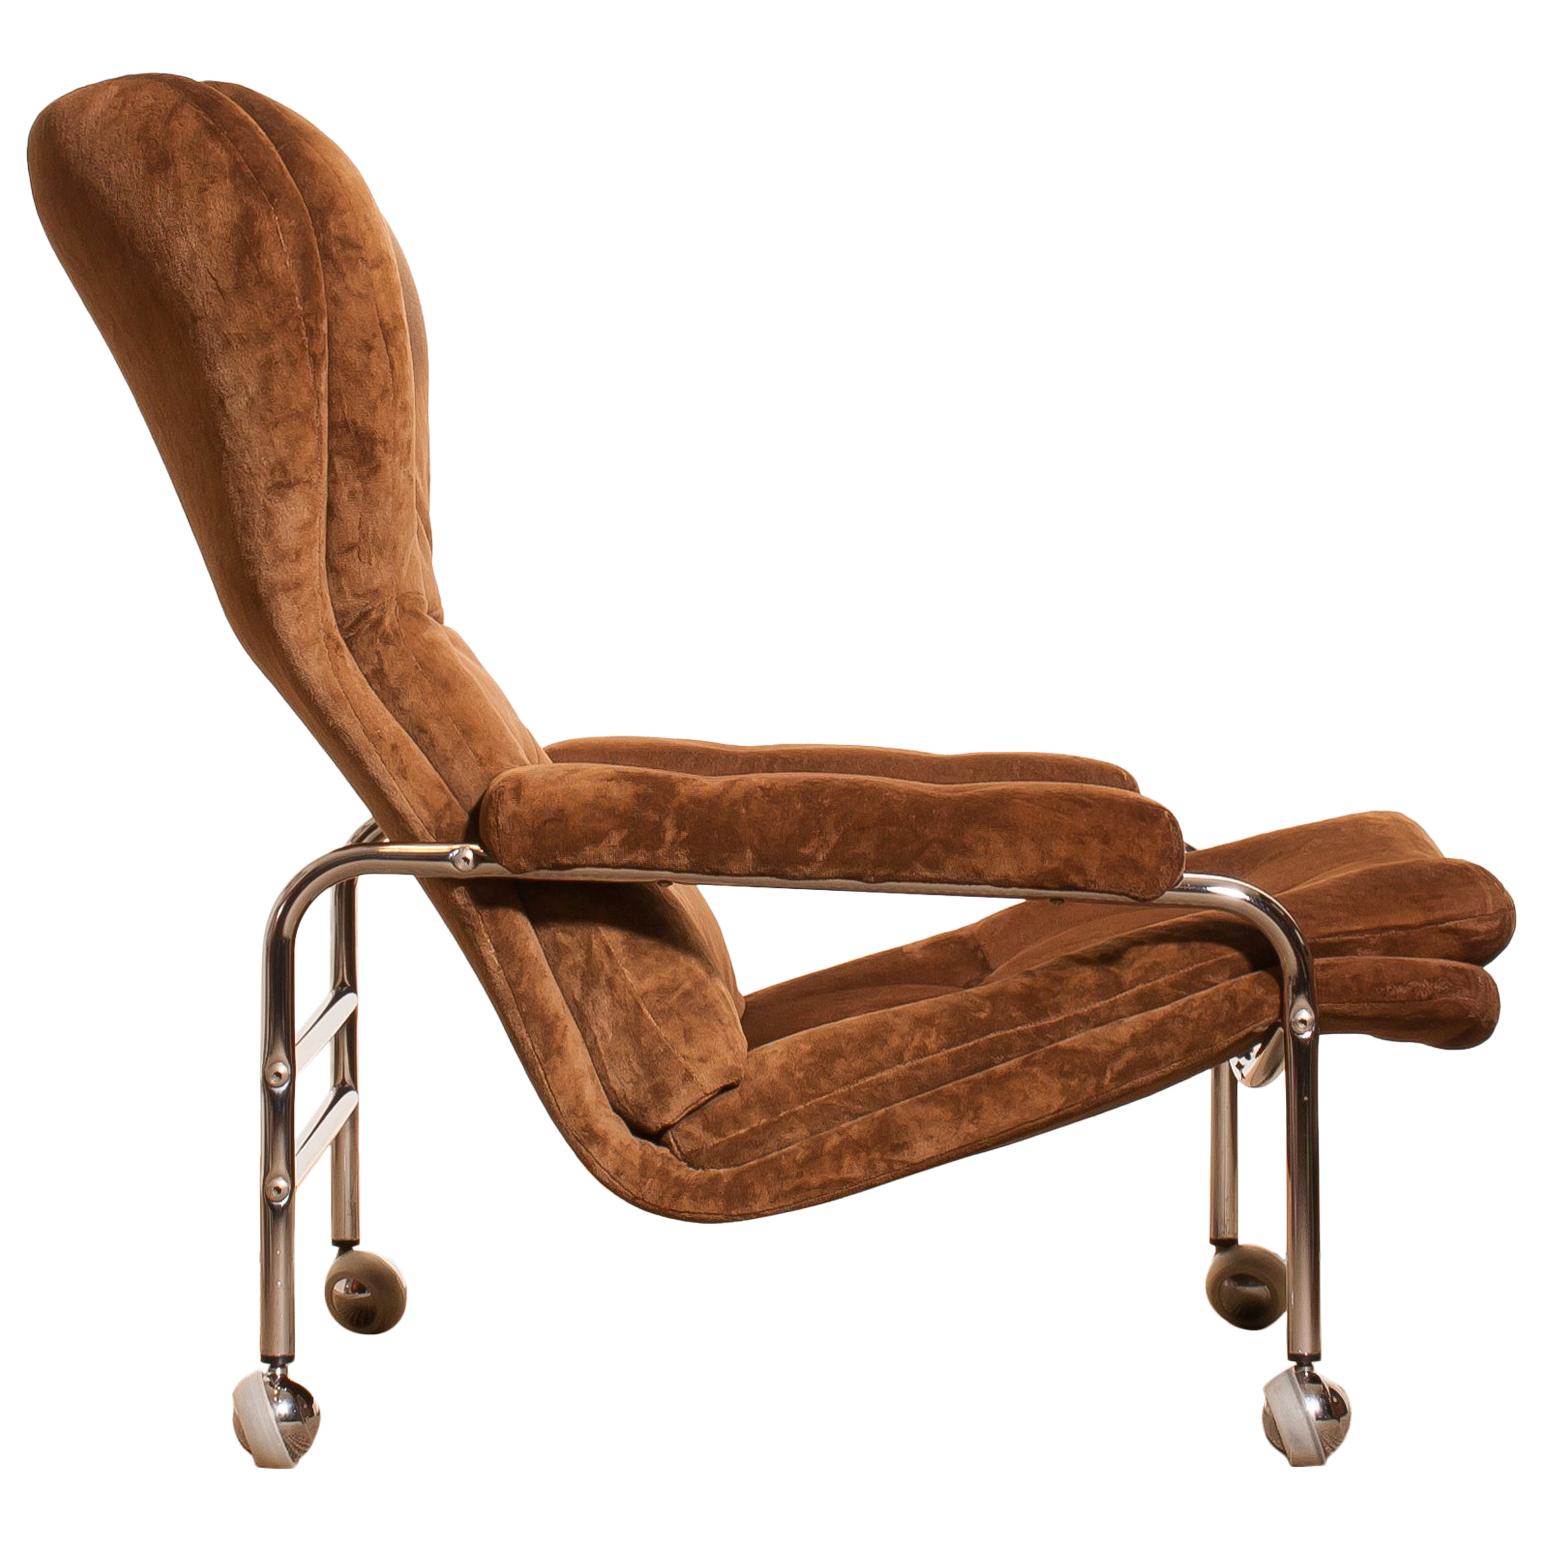 Beautiful lounge chair made by Scapa Rydaholm, Sweden.
This chair has a brown velour’s seating on a chromed wheeled frame.
It is in a very nice used condition with little bald spots in the fabric.
Period 1970s.
Dimensions: H 88 cm x W 73 cm x D